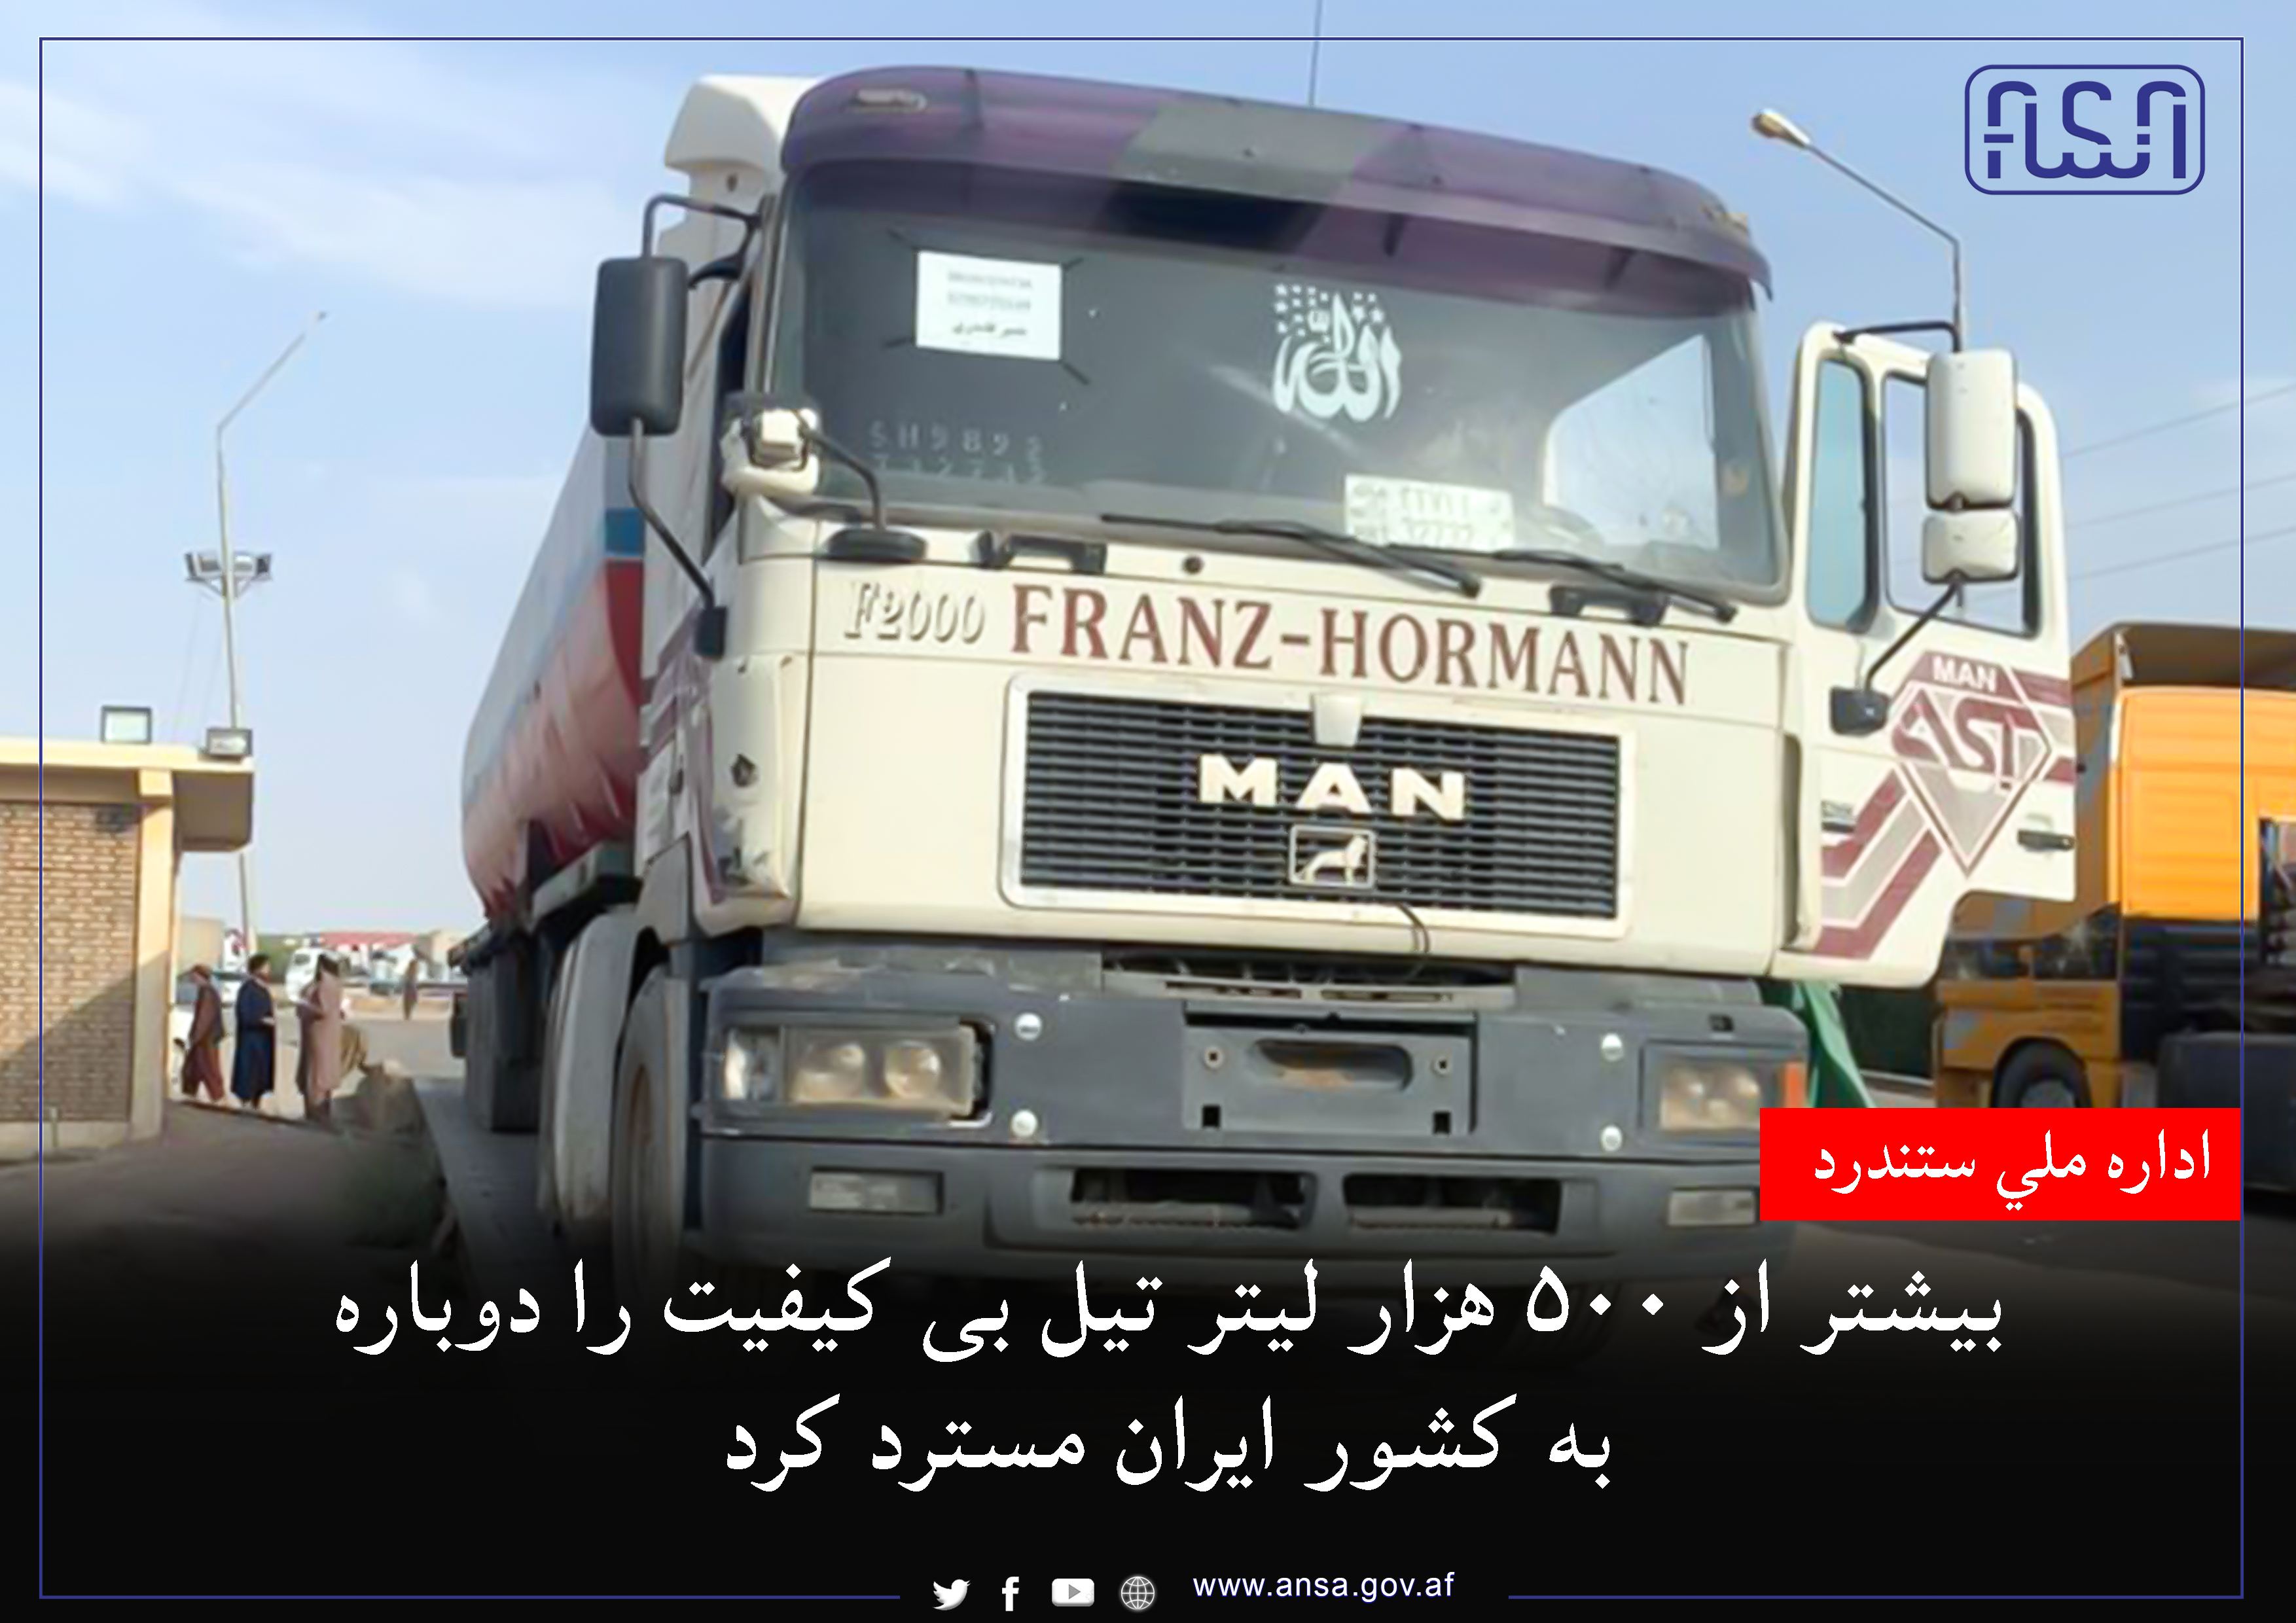 16 tankers of low-quality oil were rejected in Herat province